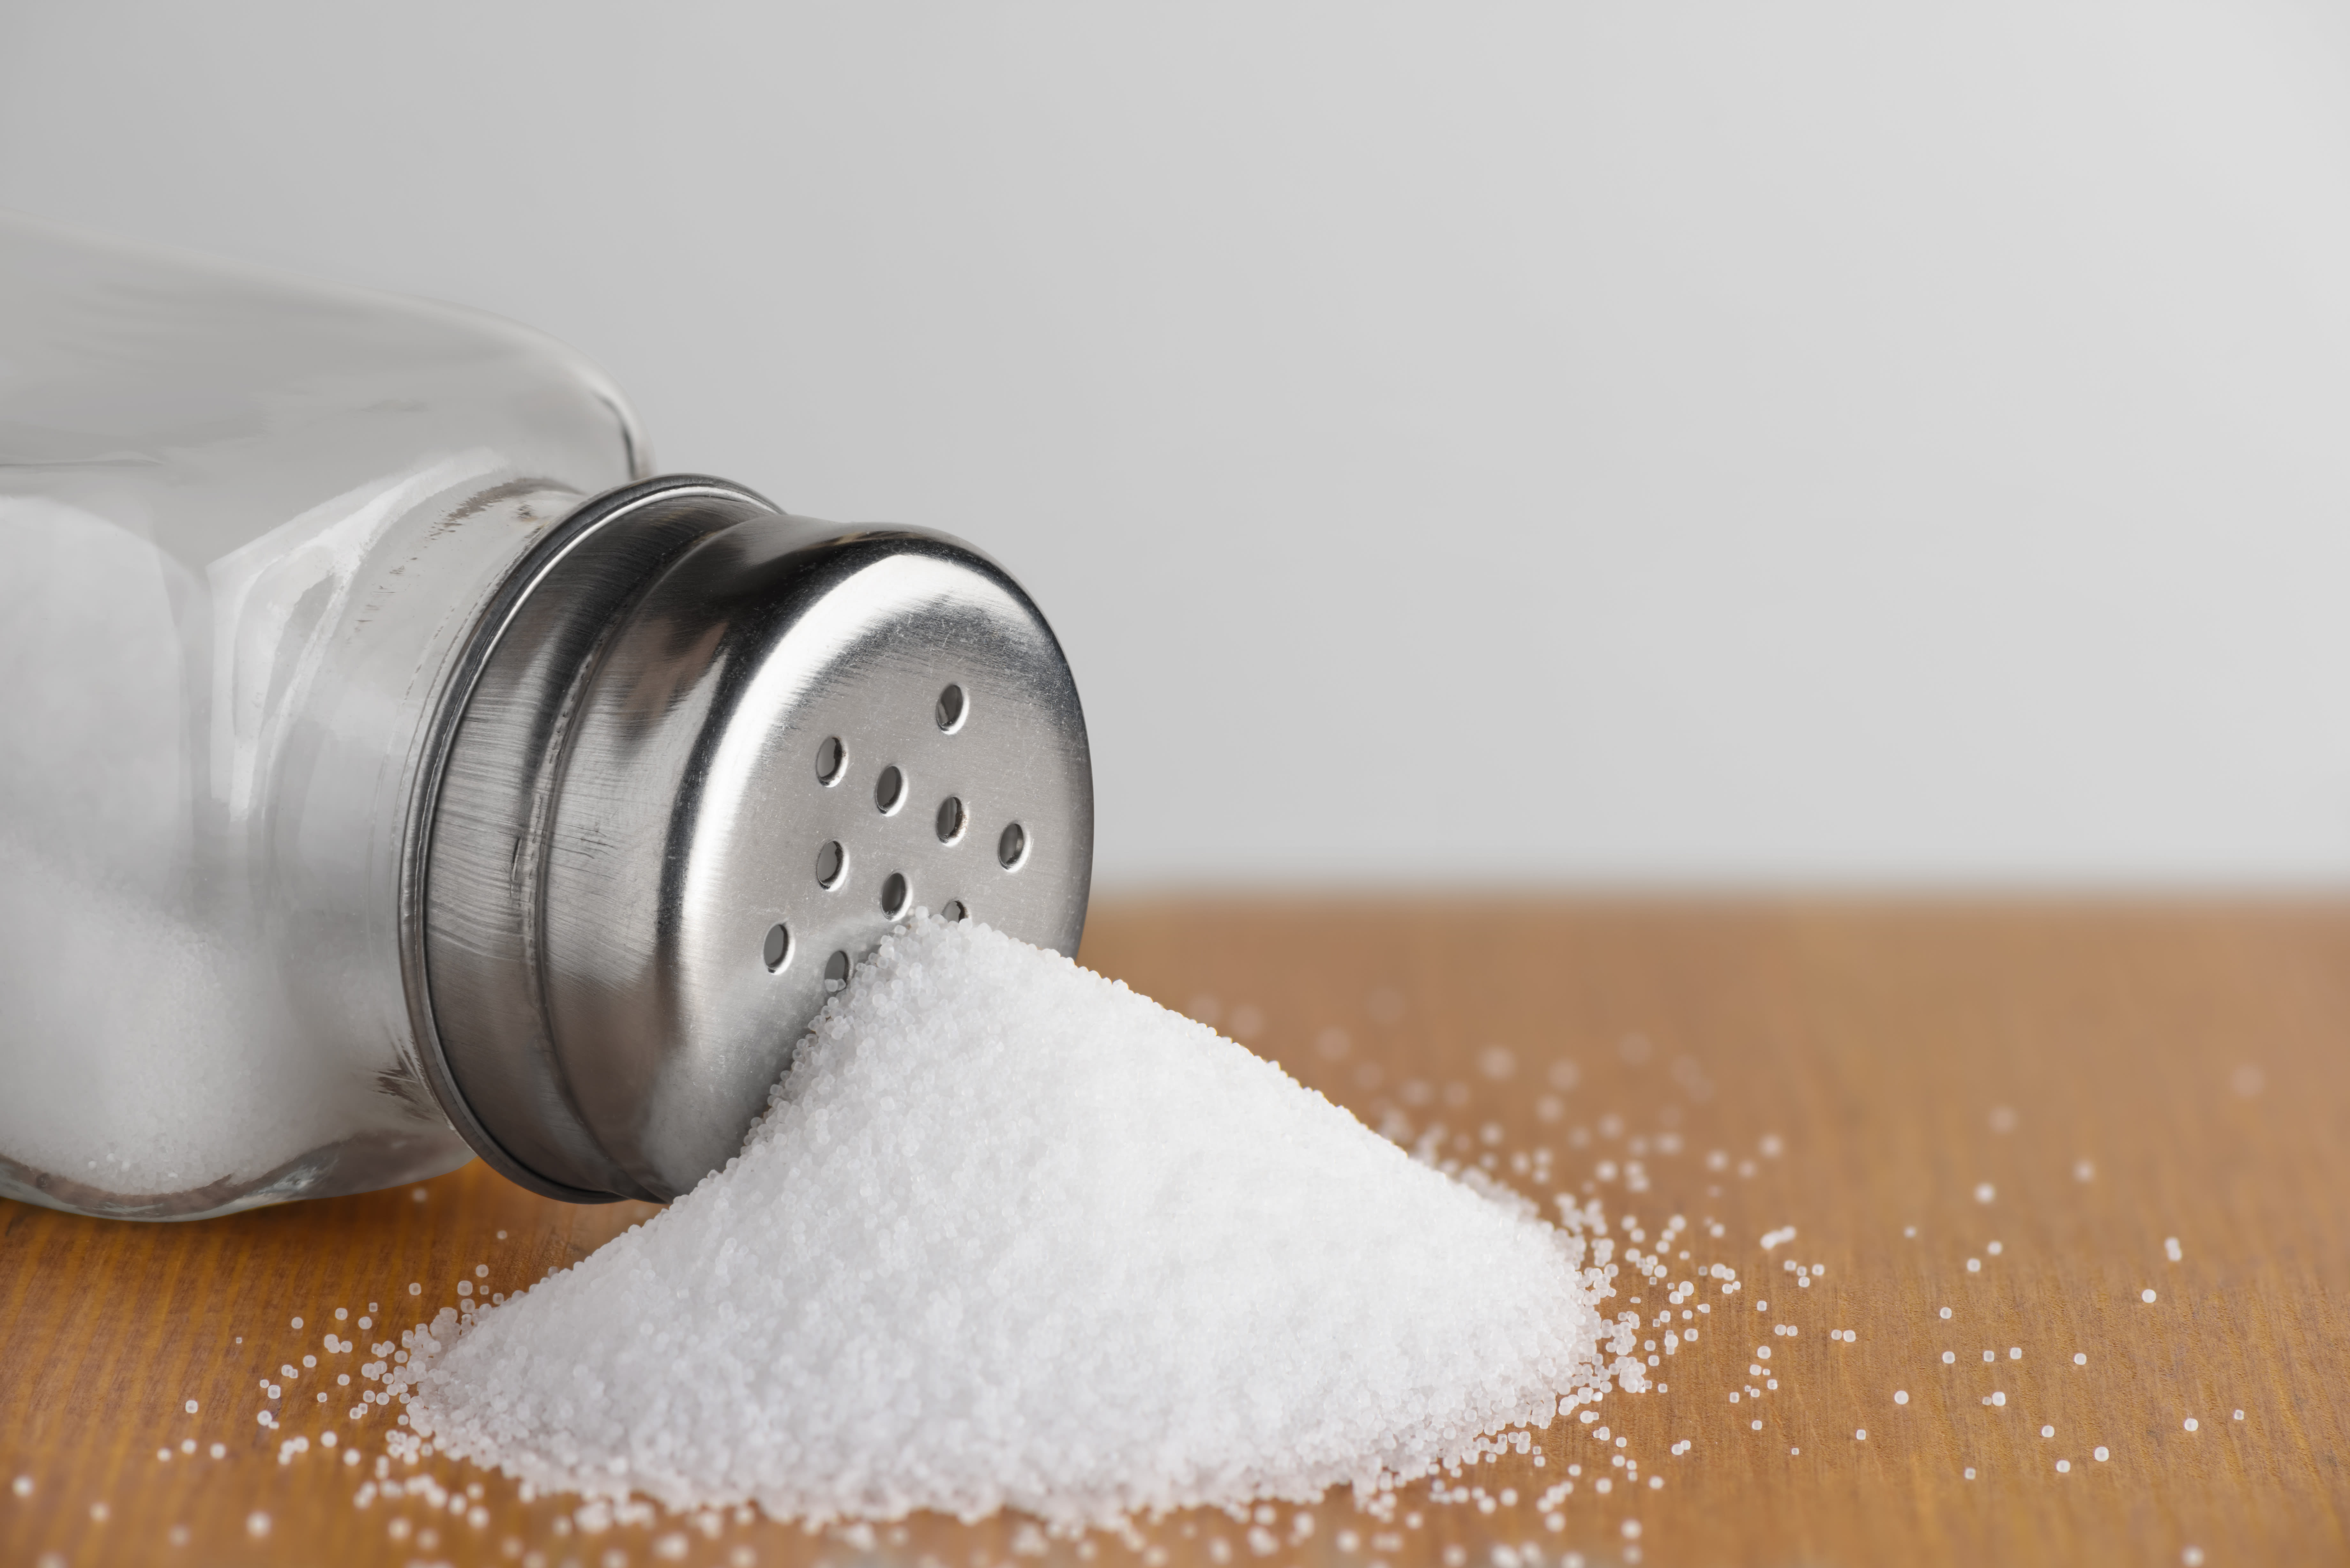 Adding table salt to your food could increase risk of stomach cancer by 41%, study finds